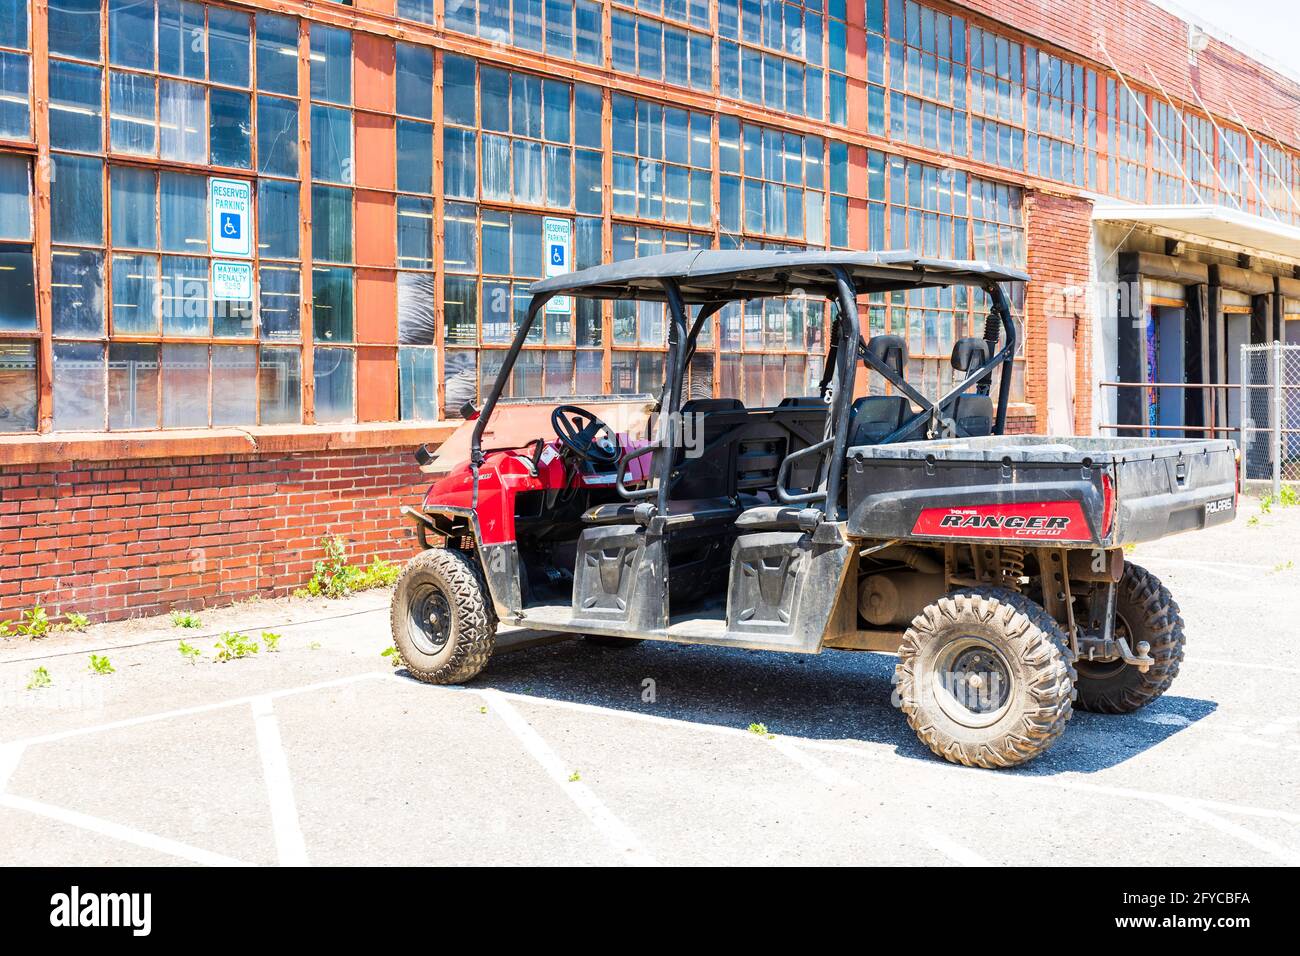 CHARLOTTE, NC, USA-23 MAY 2021: Camp North End. Polaris Ranger Crew vehicle parked at old industrial building. Stock Photo